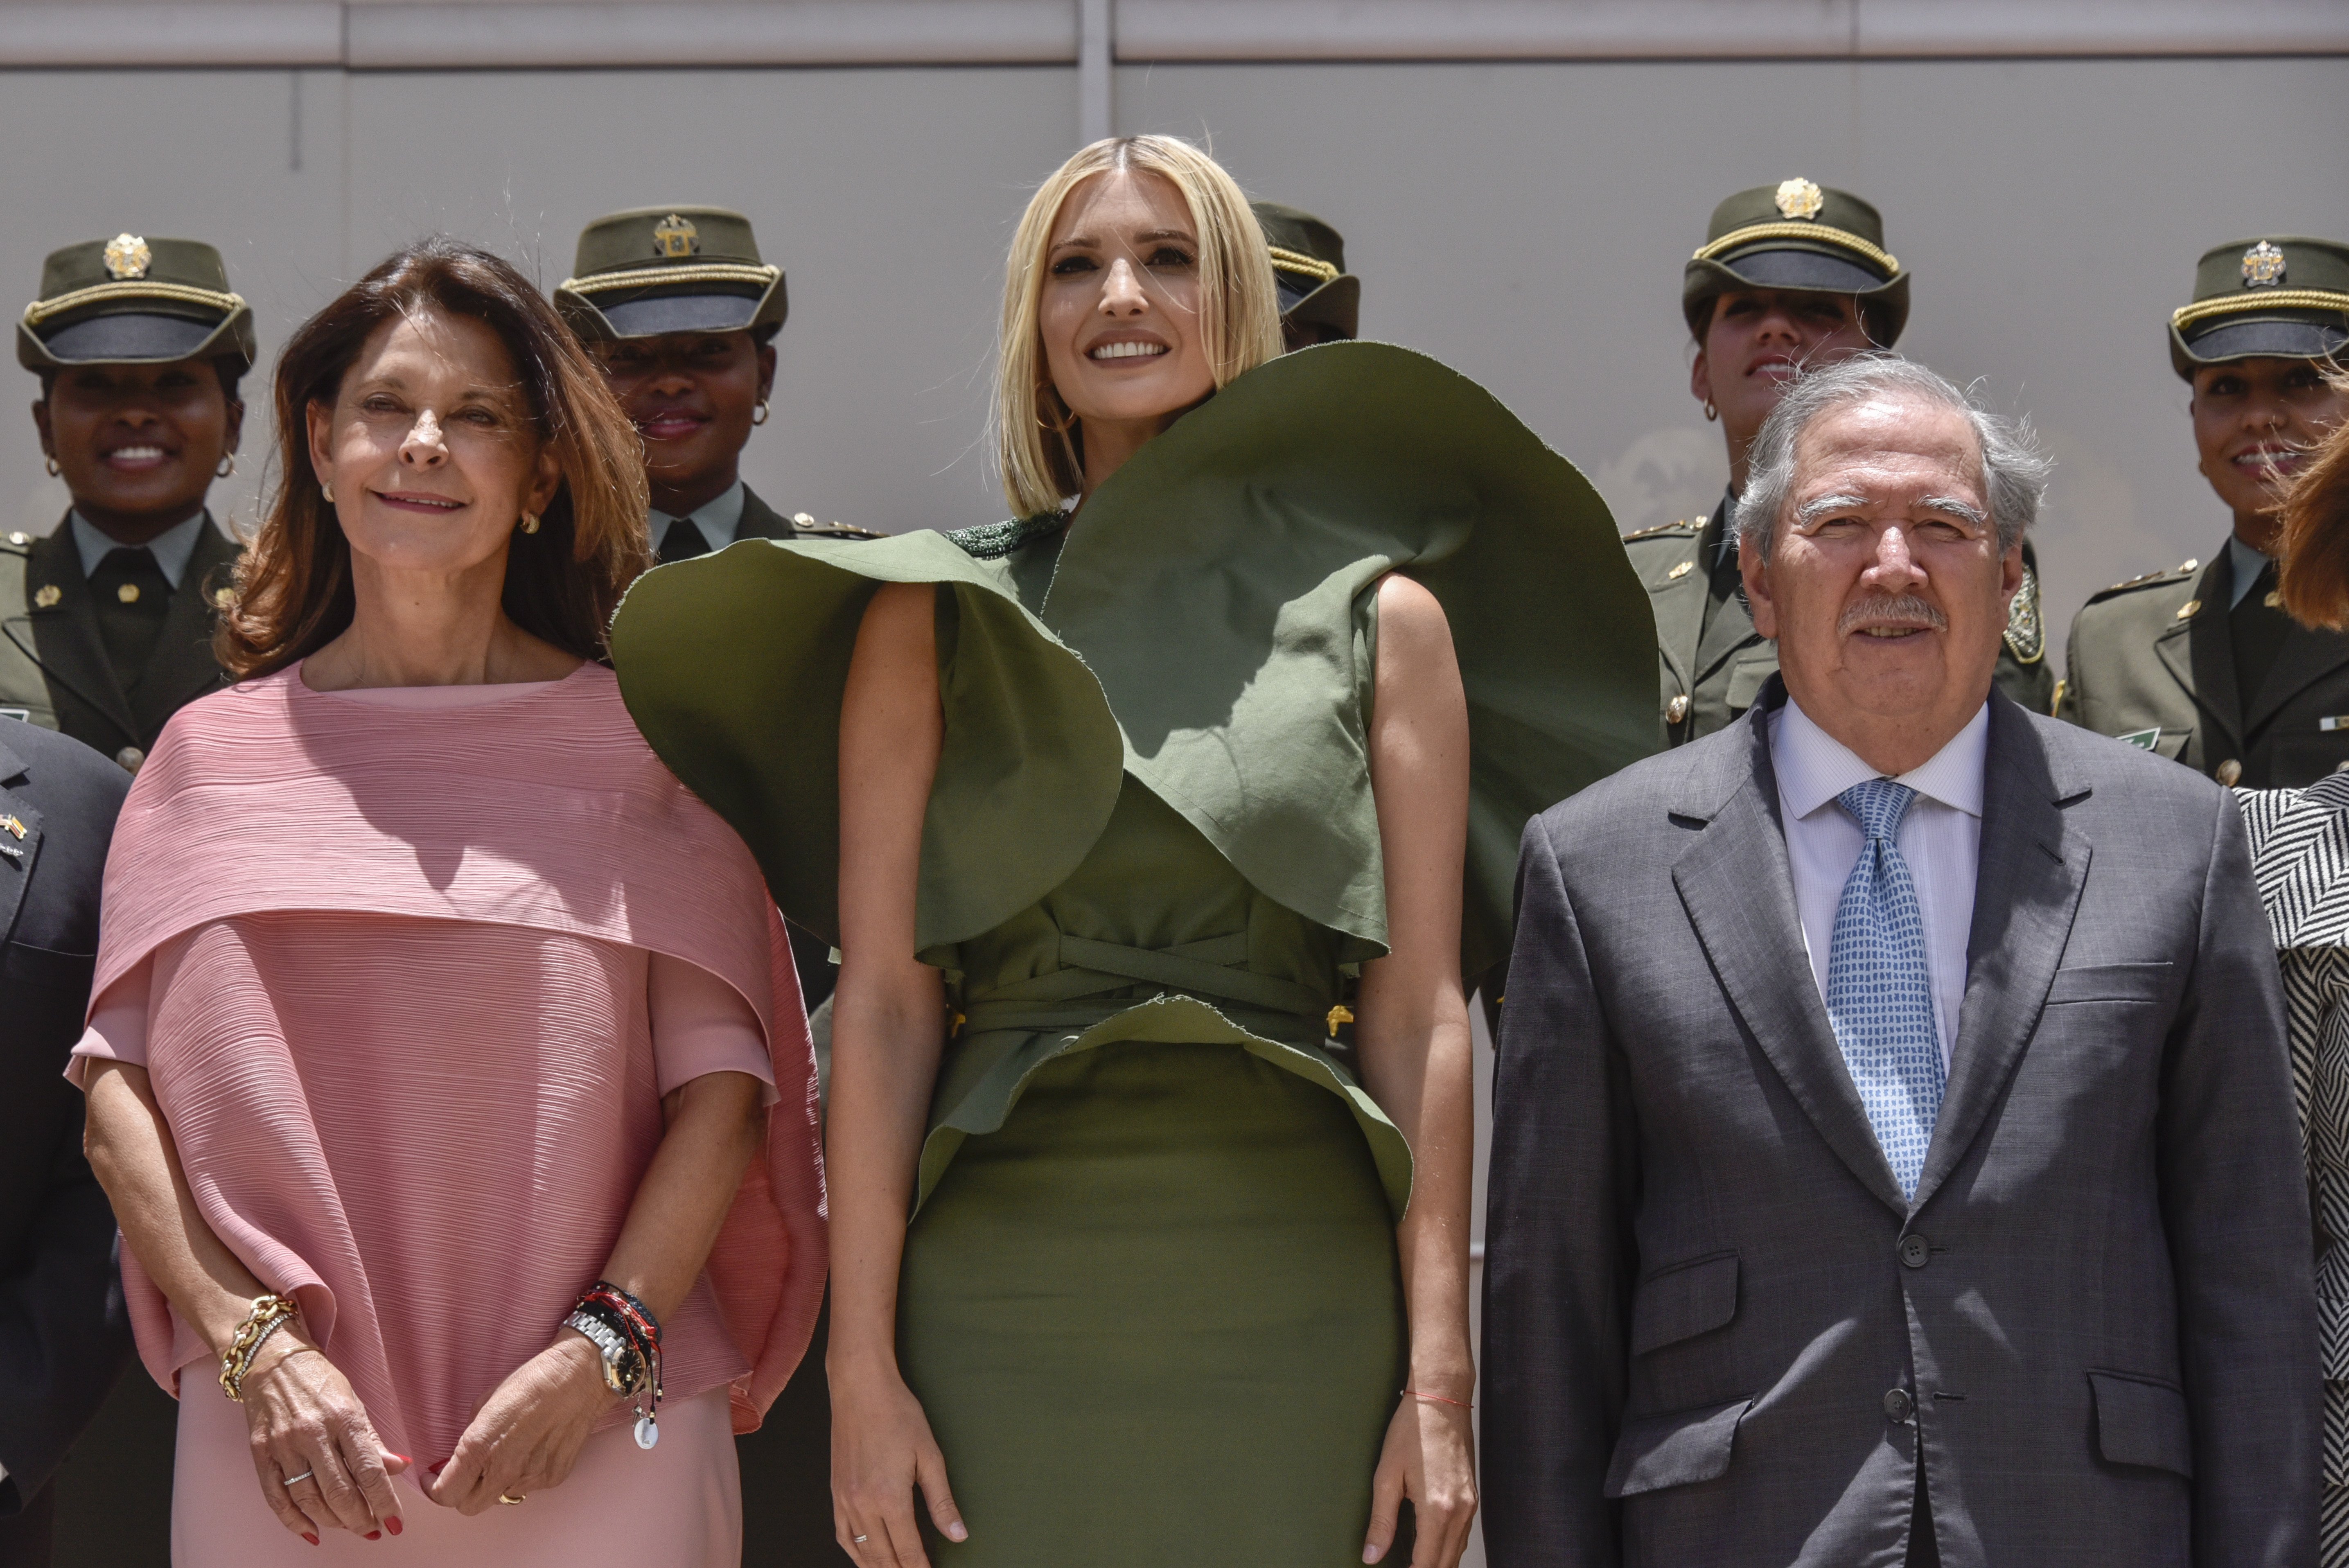 Advisor to the US President Ivanka Trump (C) poses for the family photo along with Vice President of Colombia Marta Lucia Ramirez (L) and Colombia's Minister of National Defense Guillermo Botero (R) after a meeting with female police cadets at General Santander National Police Academy on September 03, 2019 in Bogota, Colombia | Photo: Getty Images